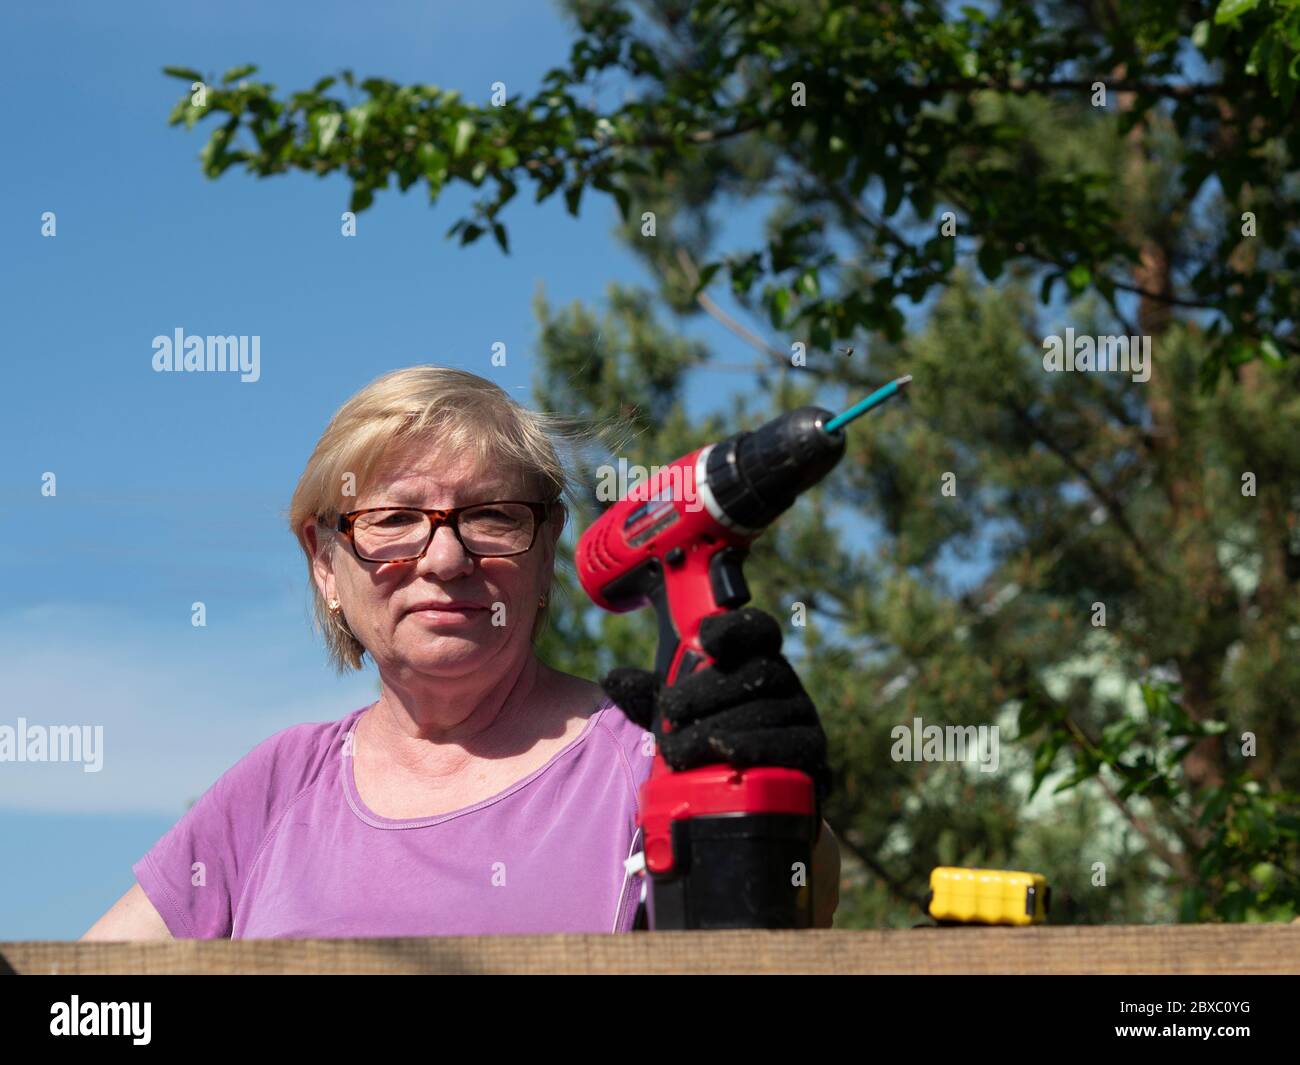 Senior Caucasian woman fastens a board on the roof of a farm building in the garden with a screwdriver Stock Photo